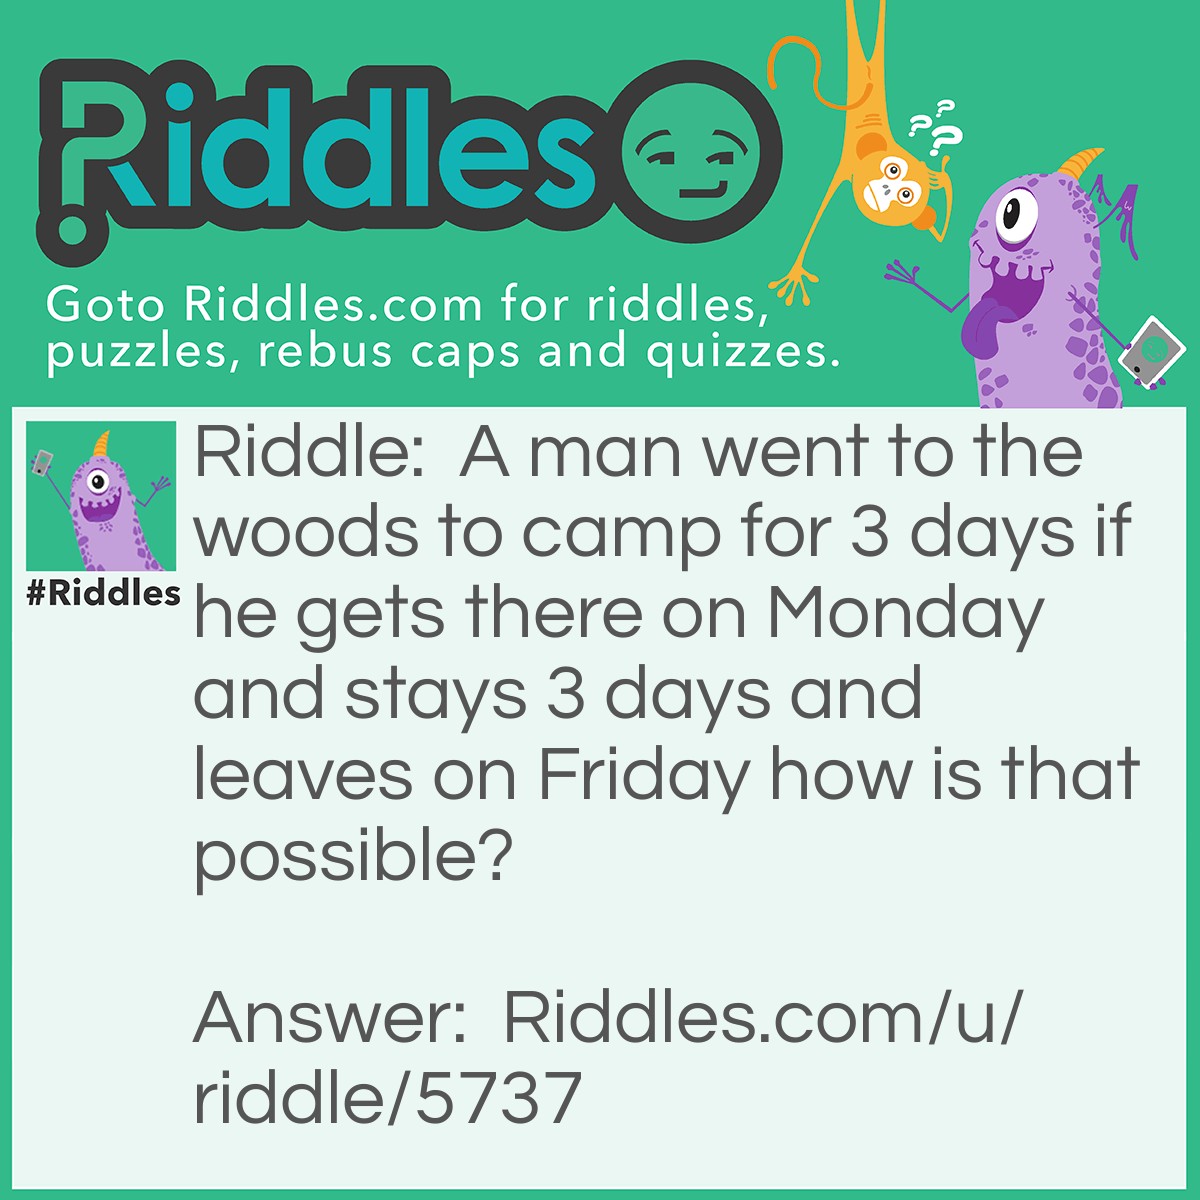 Riddle: A man went to the woods to camp for 3 days if he gets there on Monday and stays 3 days and leaves on Friday how is that possible? Answer: His horse was named Friday!!